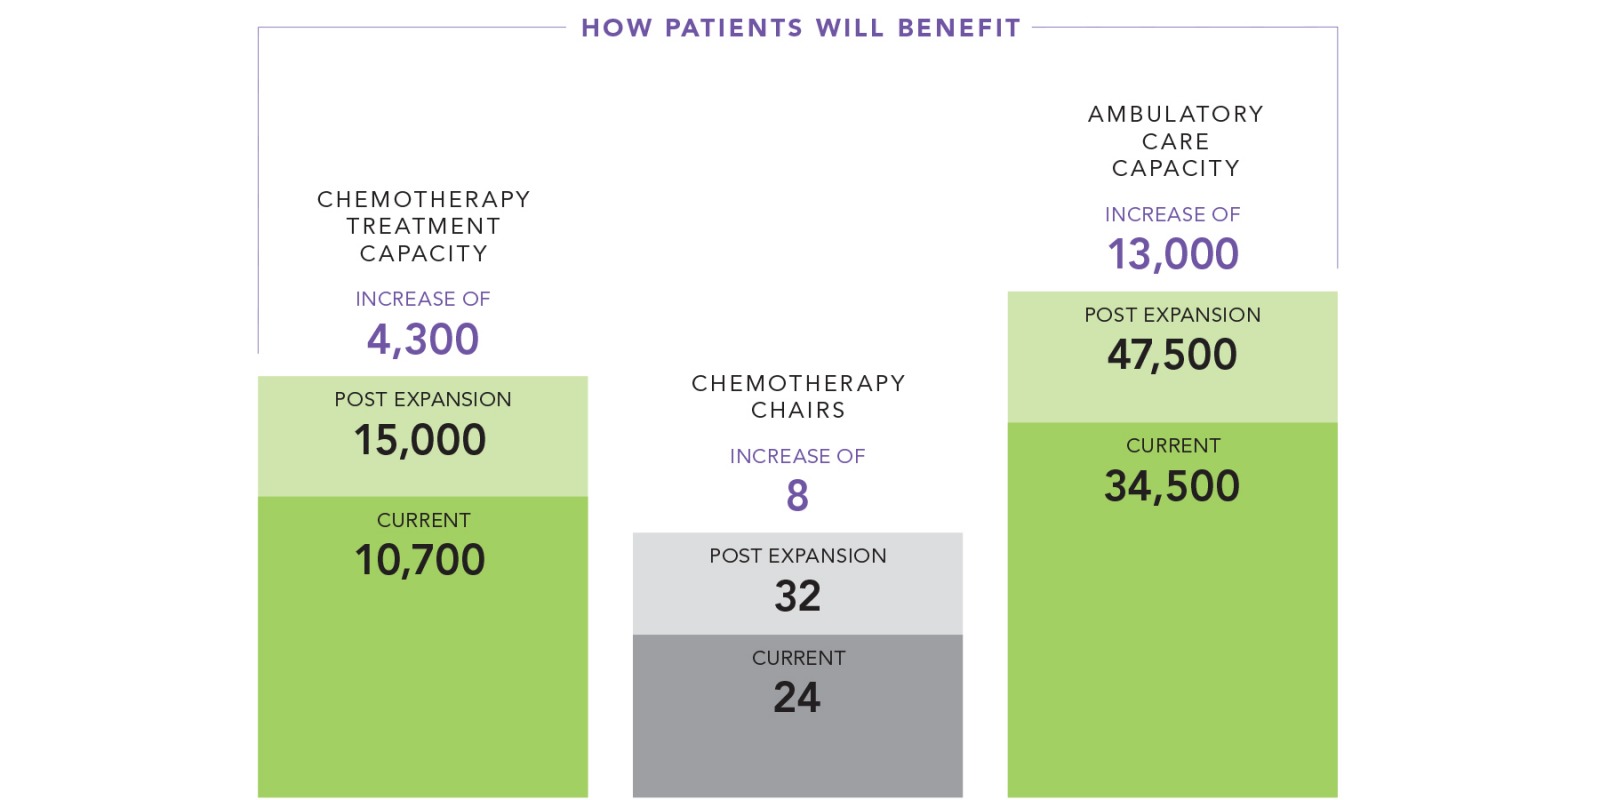 How patients will benefit